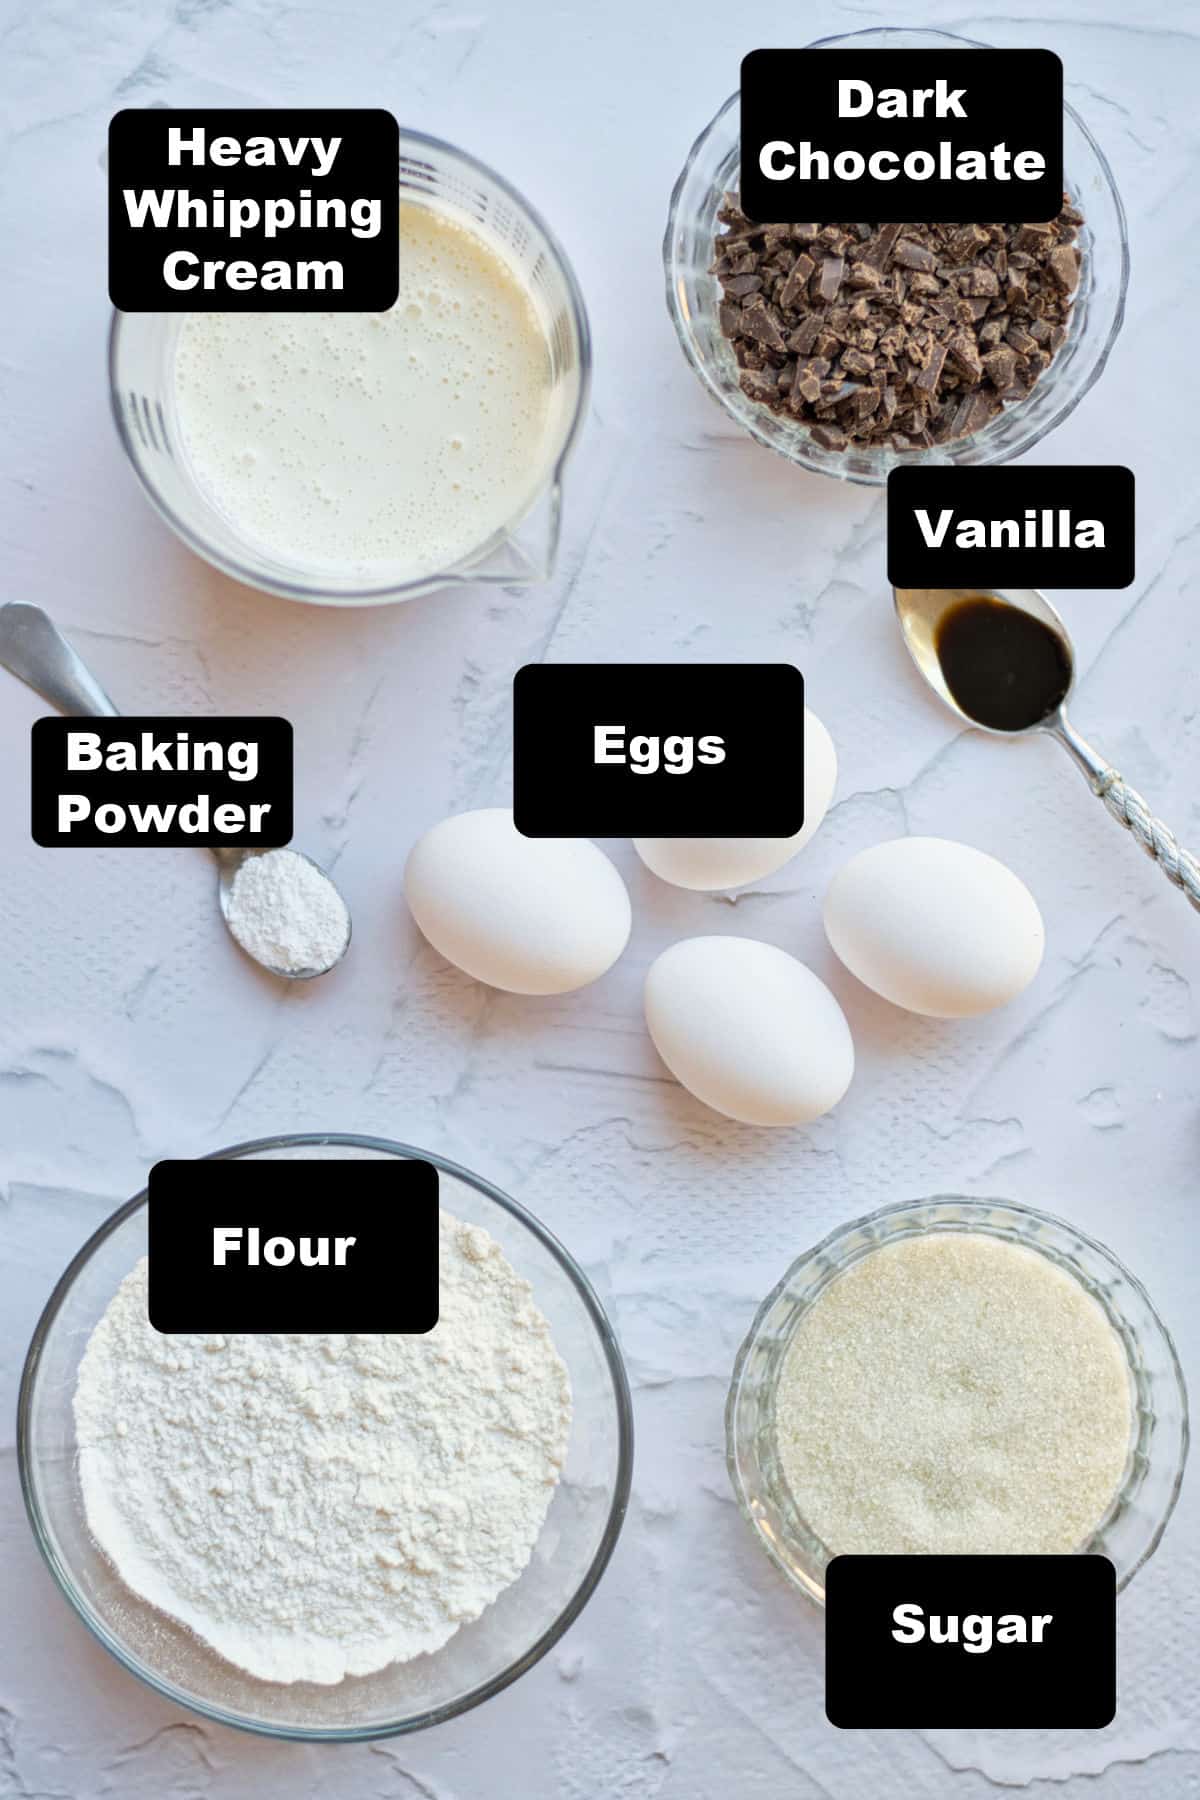 Rolled cake ingredients.